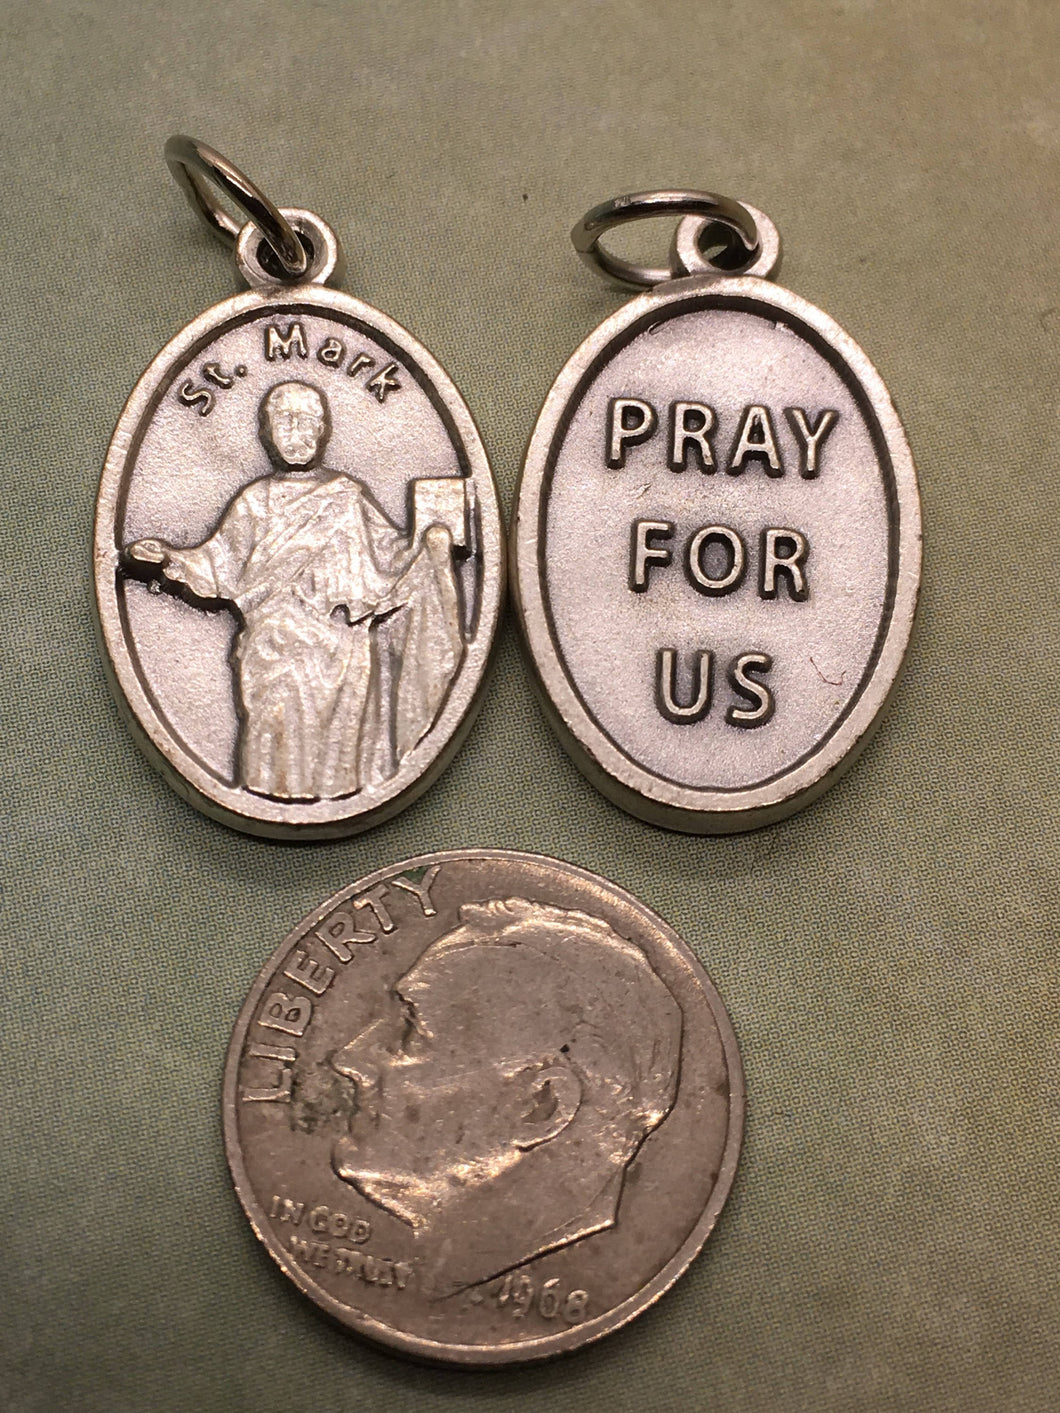 St. Mark the Evangelist (died 68) silver oxide holy medal